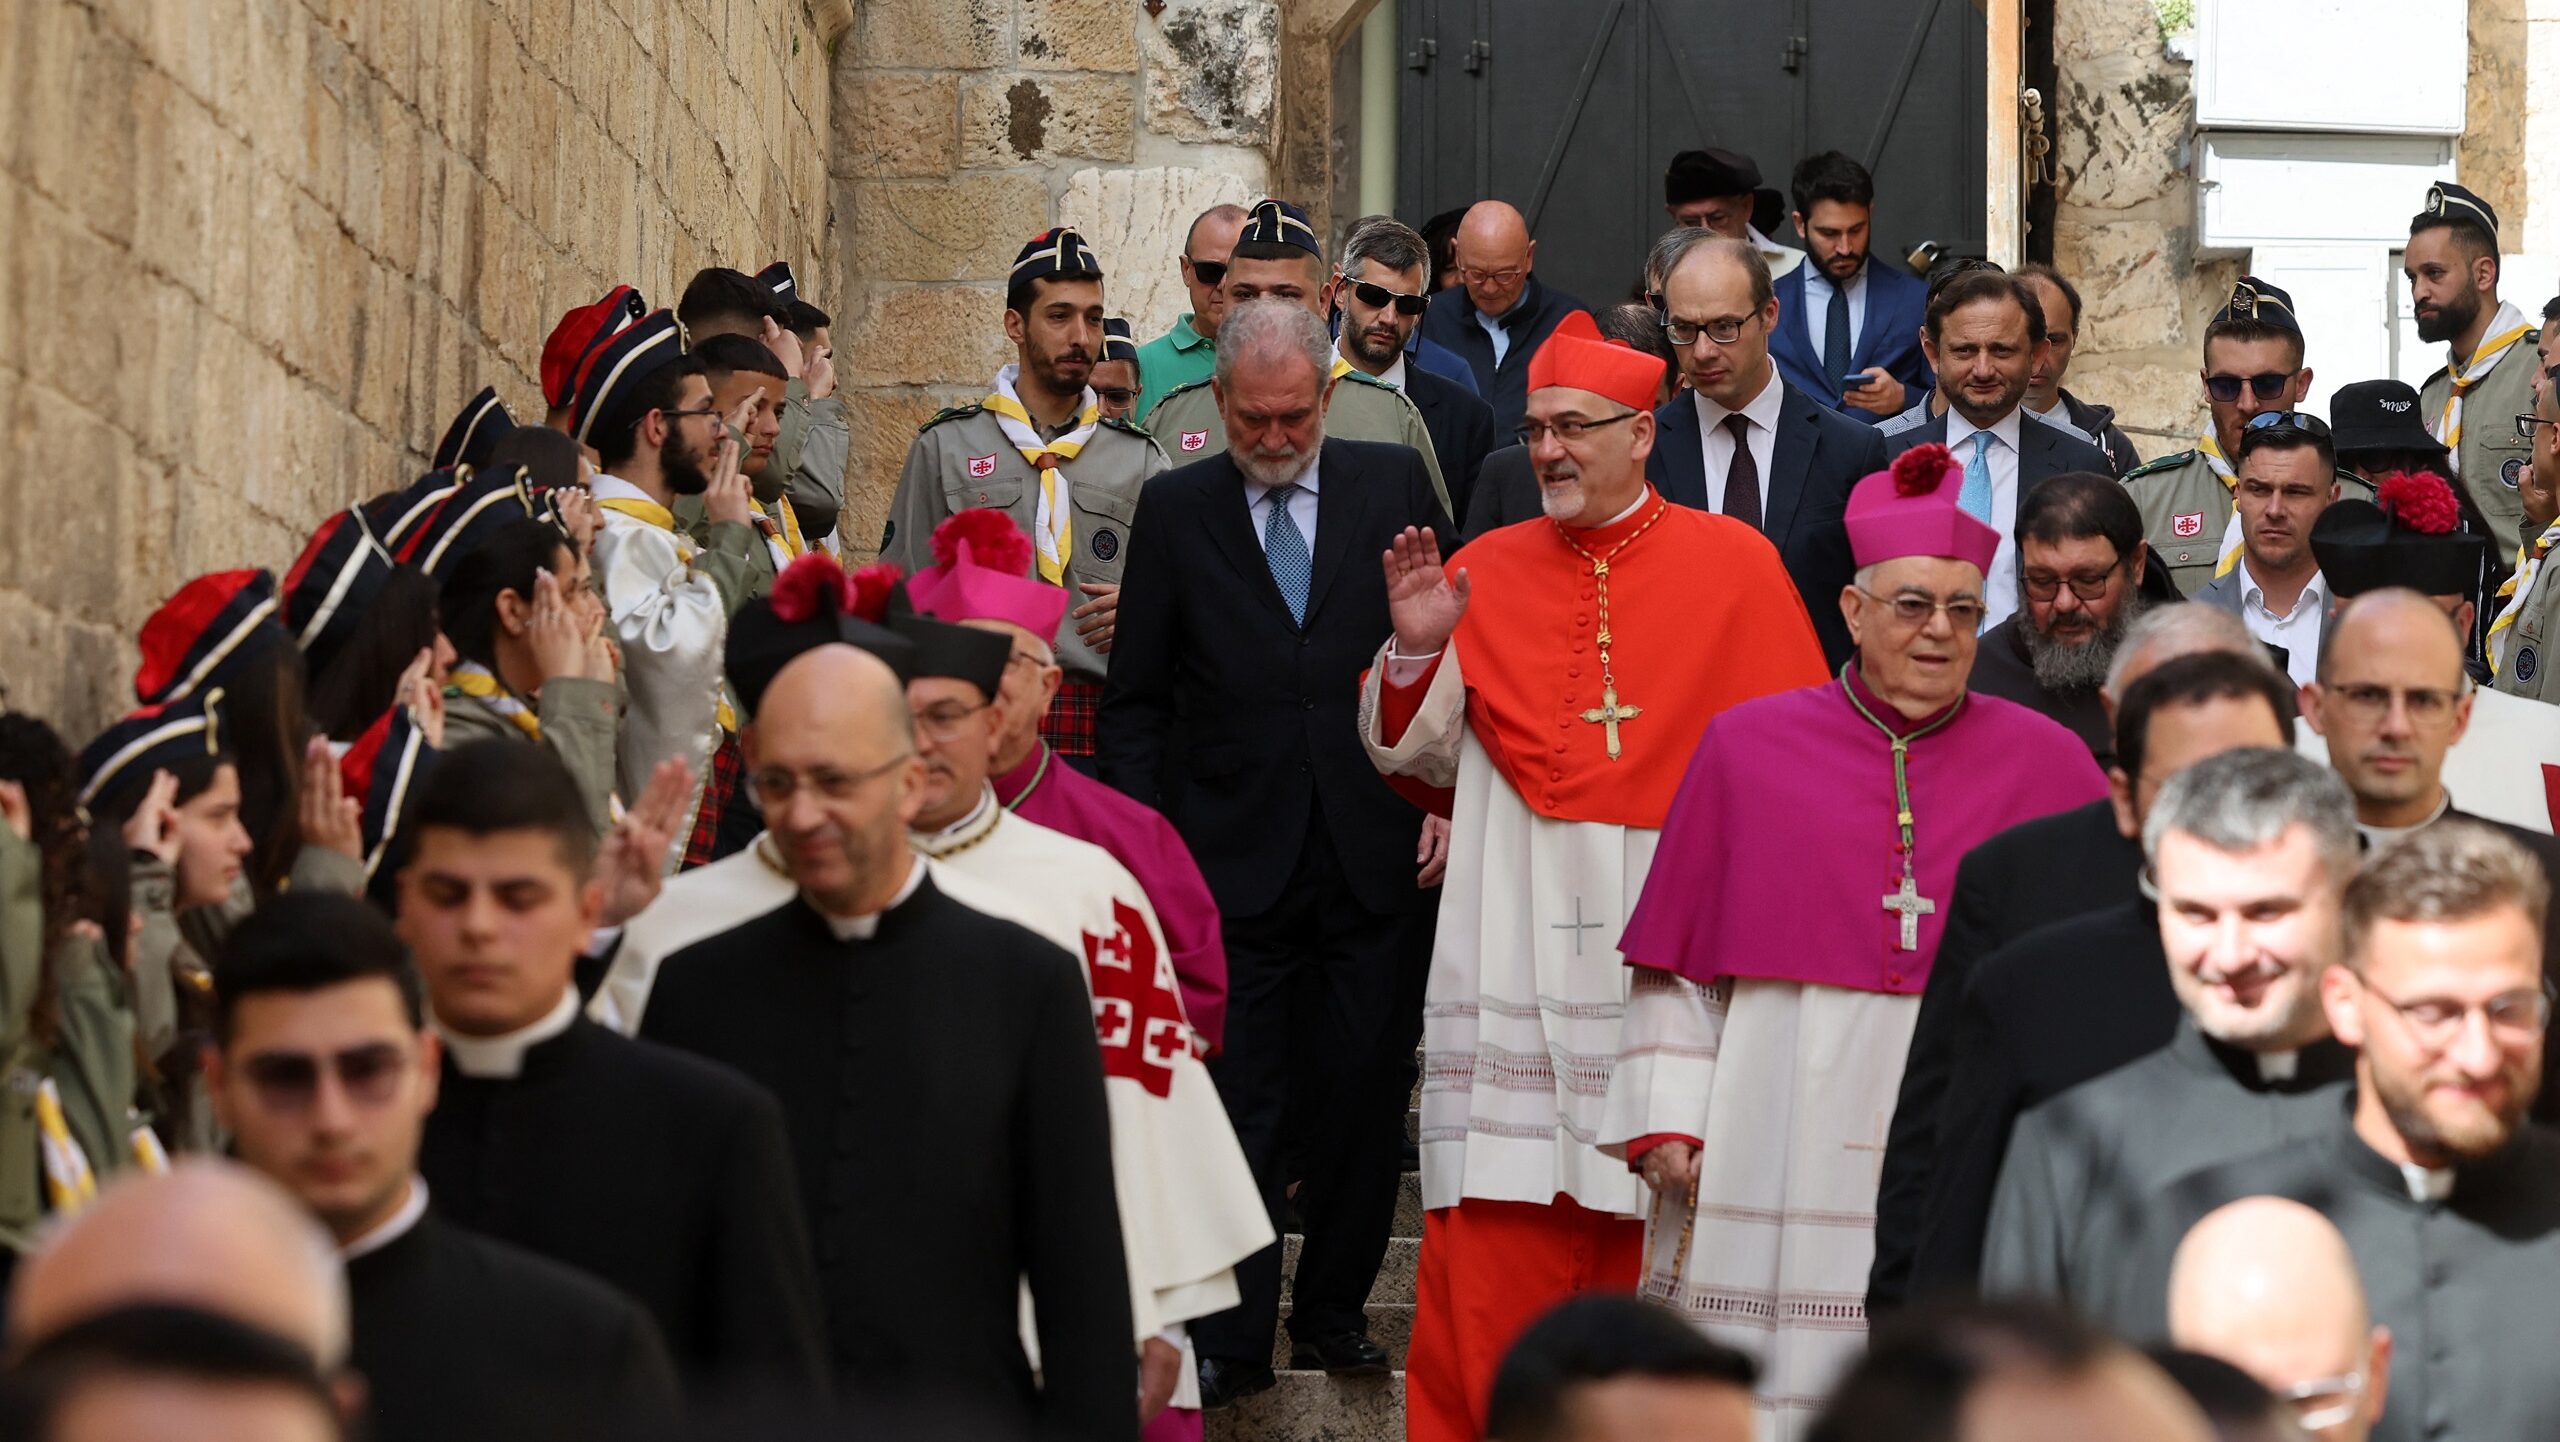 Jerusalem’s Easter Celebrations Highlight Unity and Peace Amid Conflict